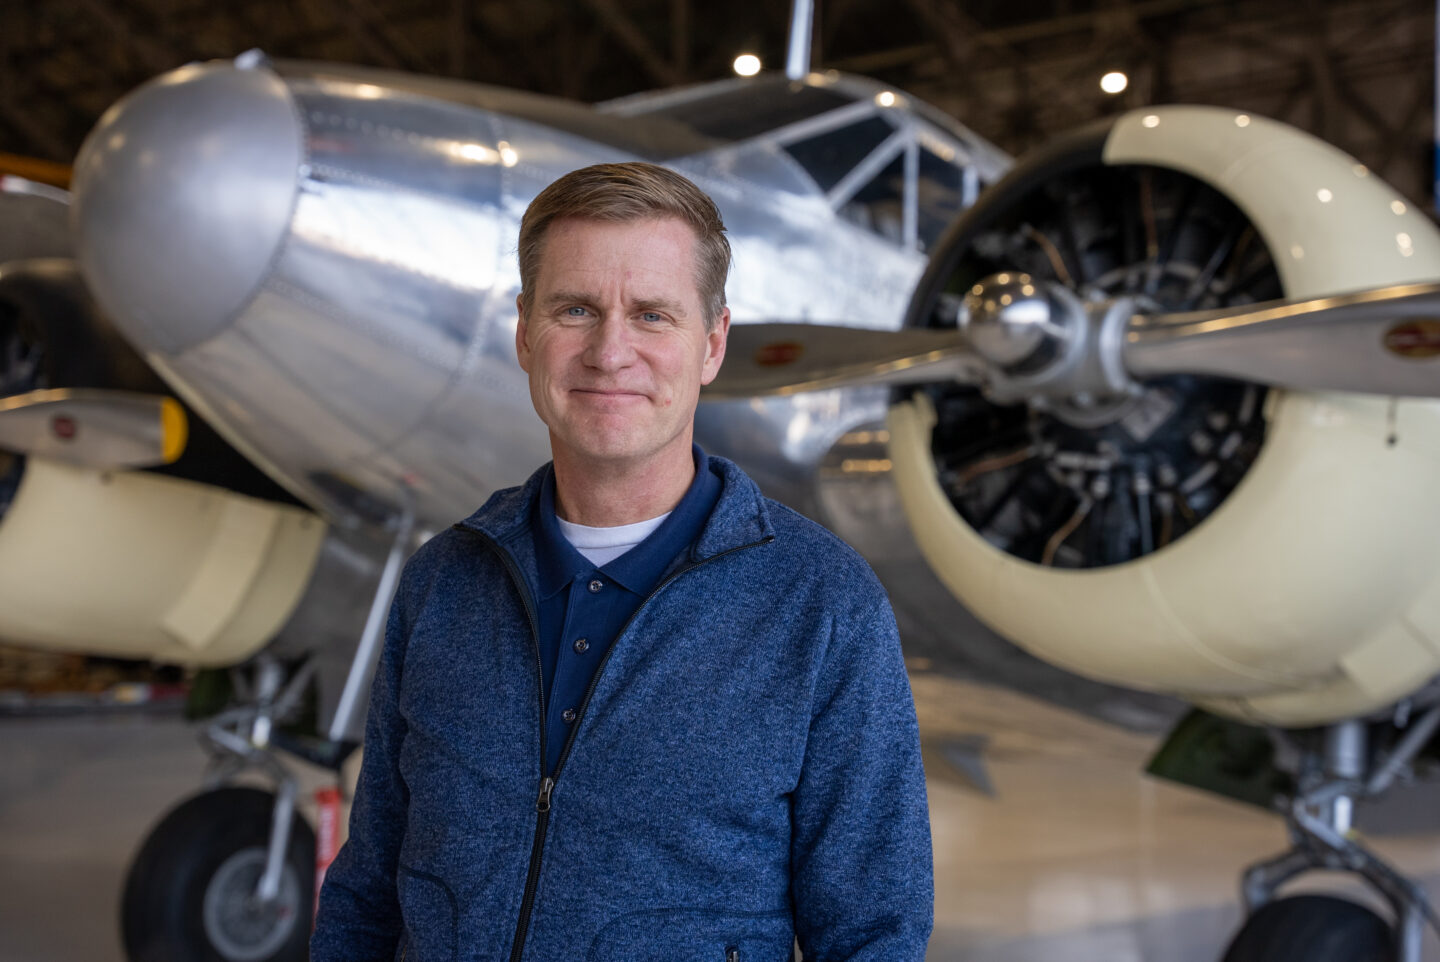 Steve Bates in front of the B-18 at the Air & Space Museum